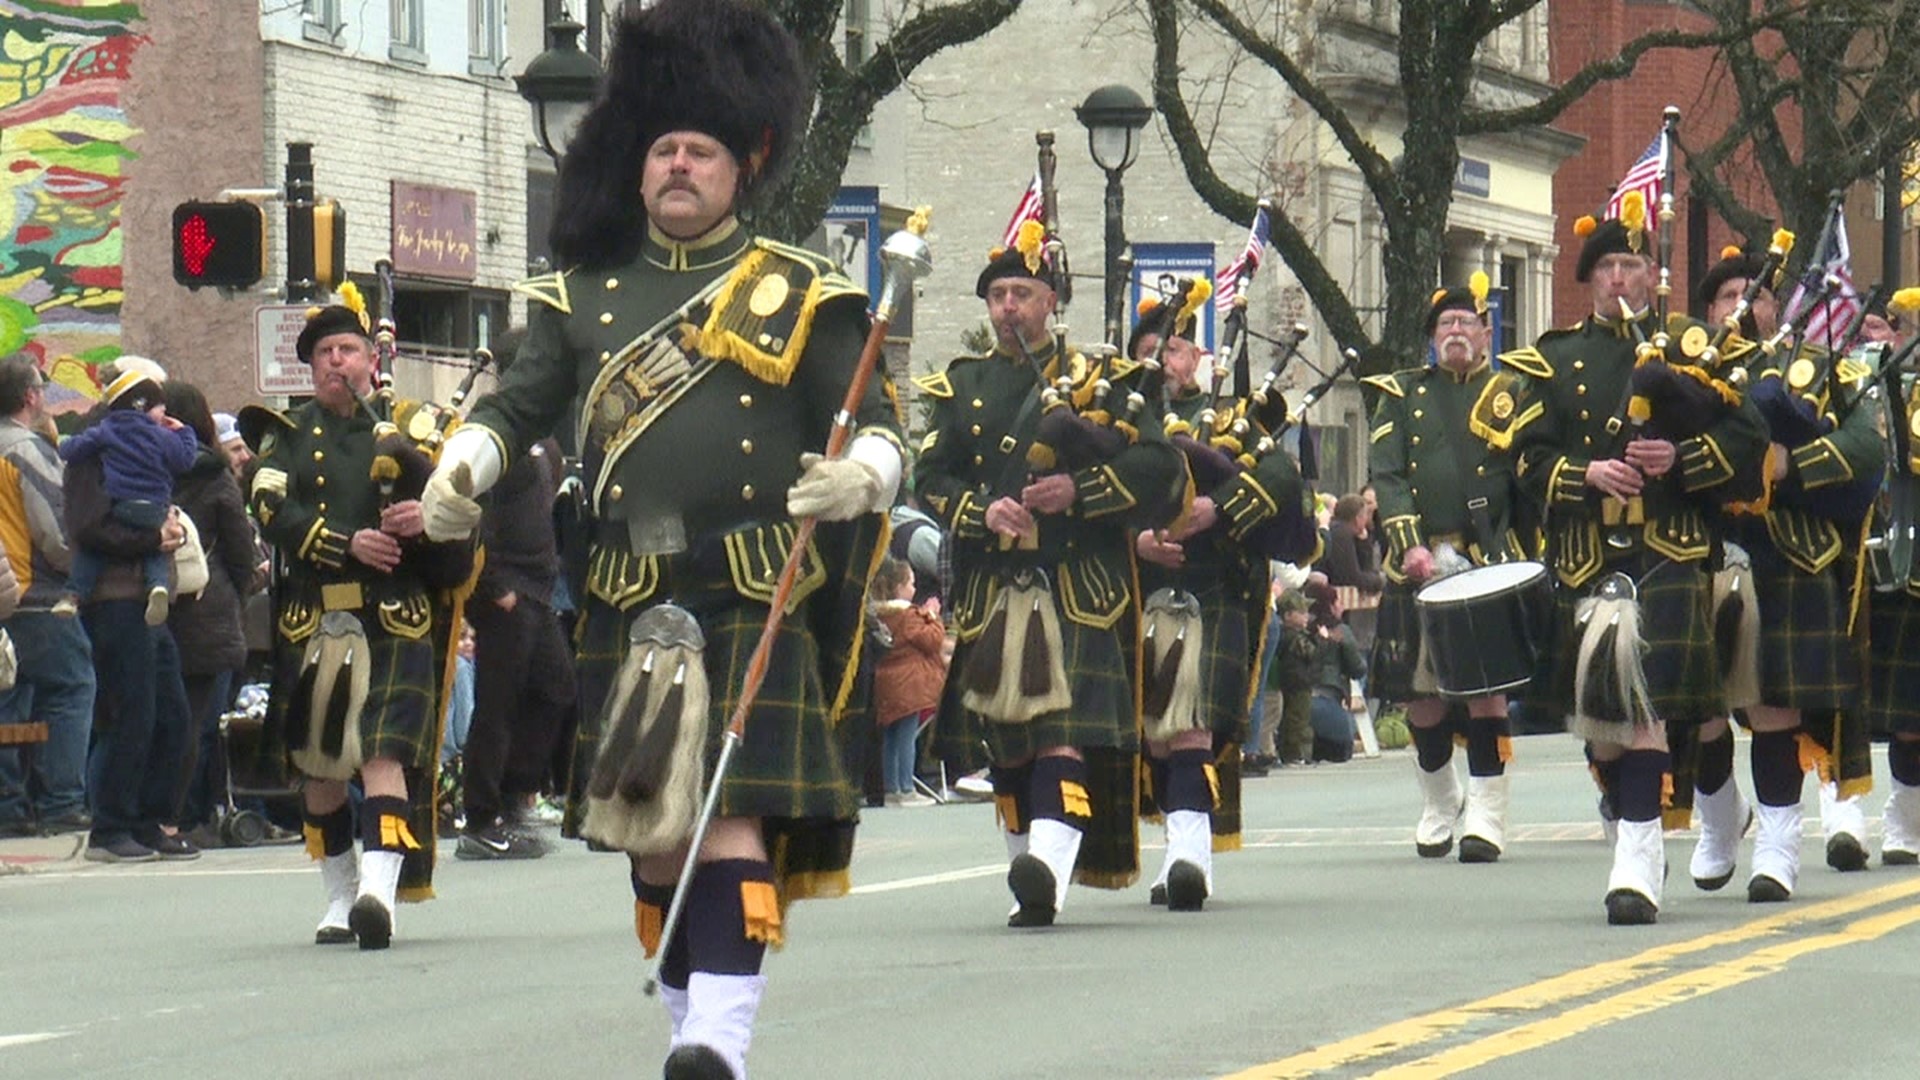 St. Patrick's Day may be over but the celebration continued Sunday in Monroe County.